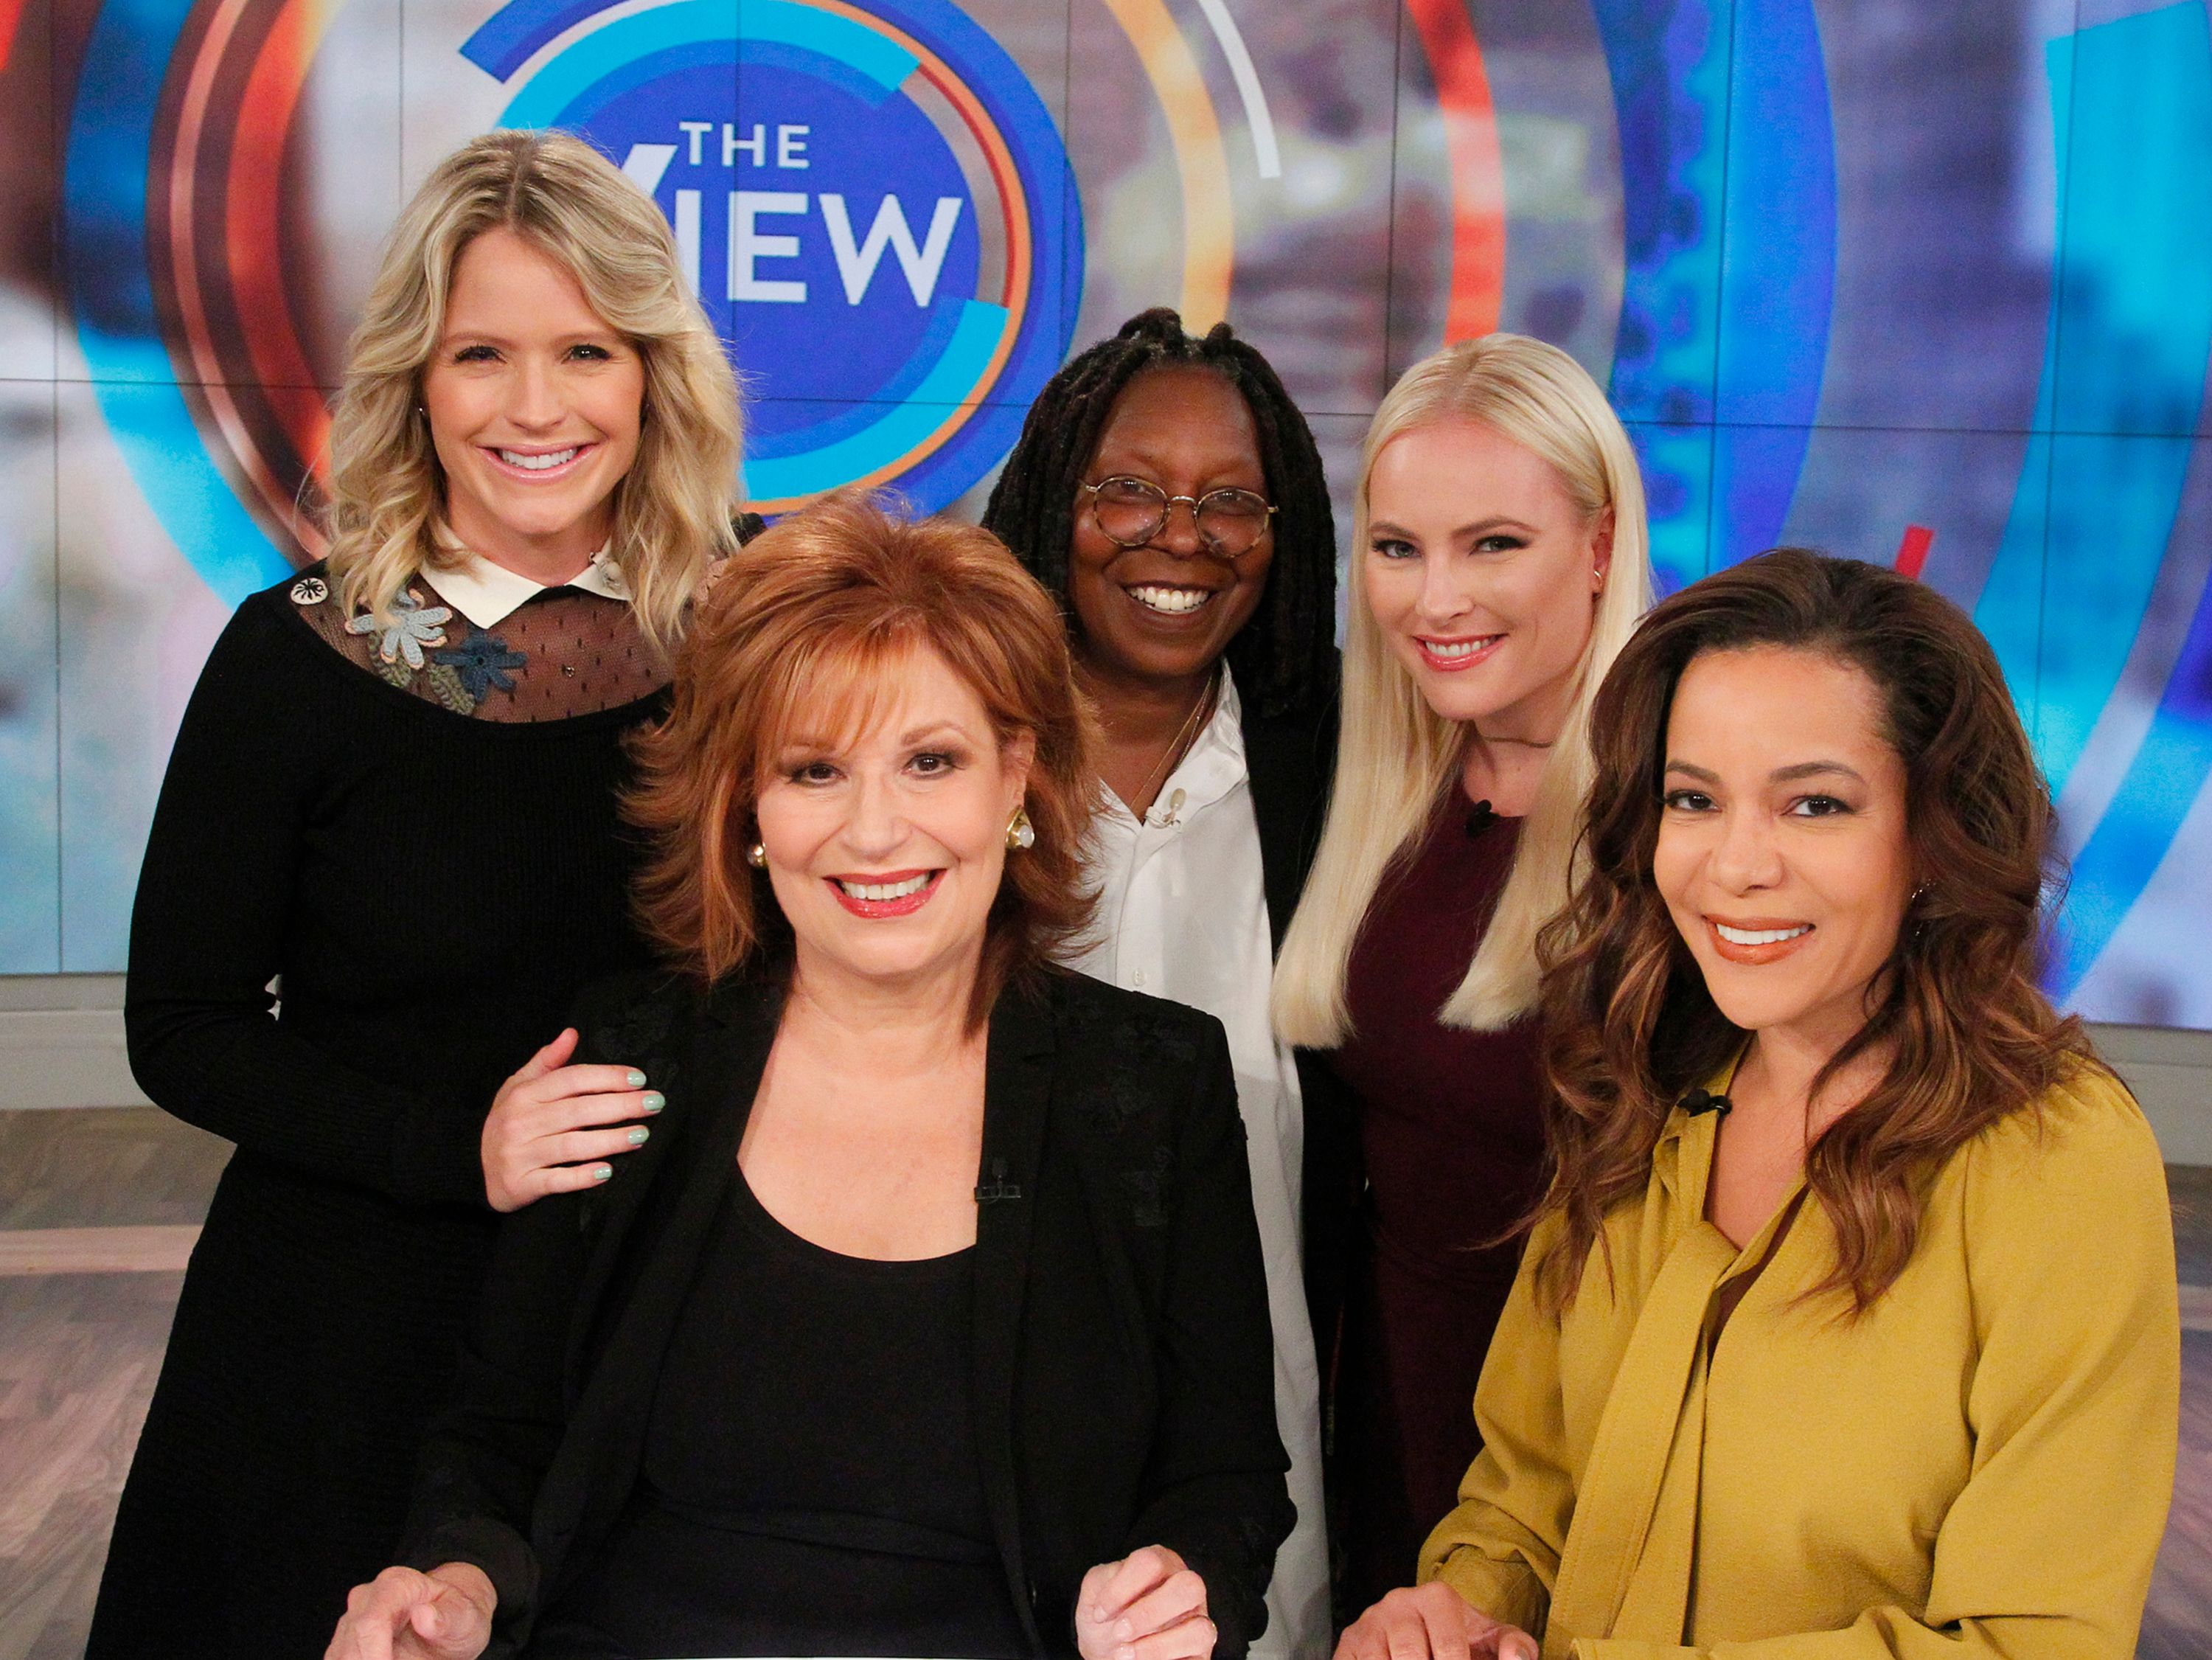 Sara Haines, Whoopi Goldberg, Meghan McCain, Sunny Hostin, and Joy Behar on "The View" in 2017 | Photo: Lou Rocco/ABC/Getty Images